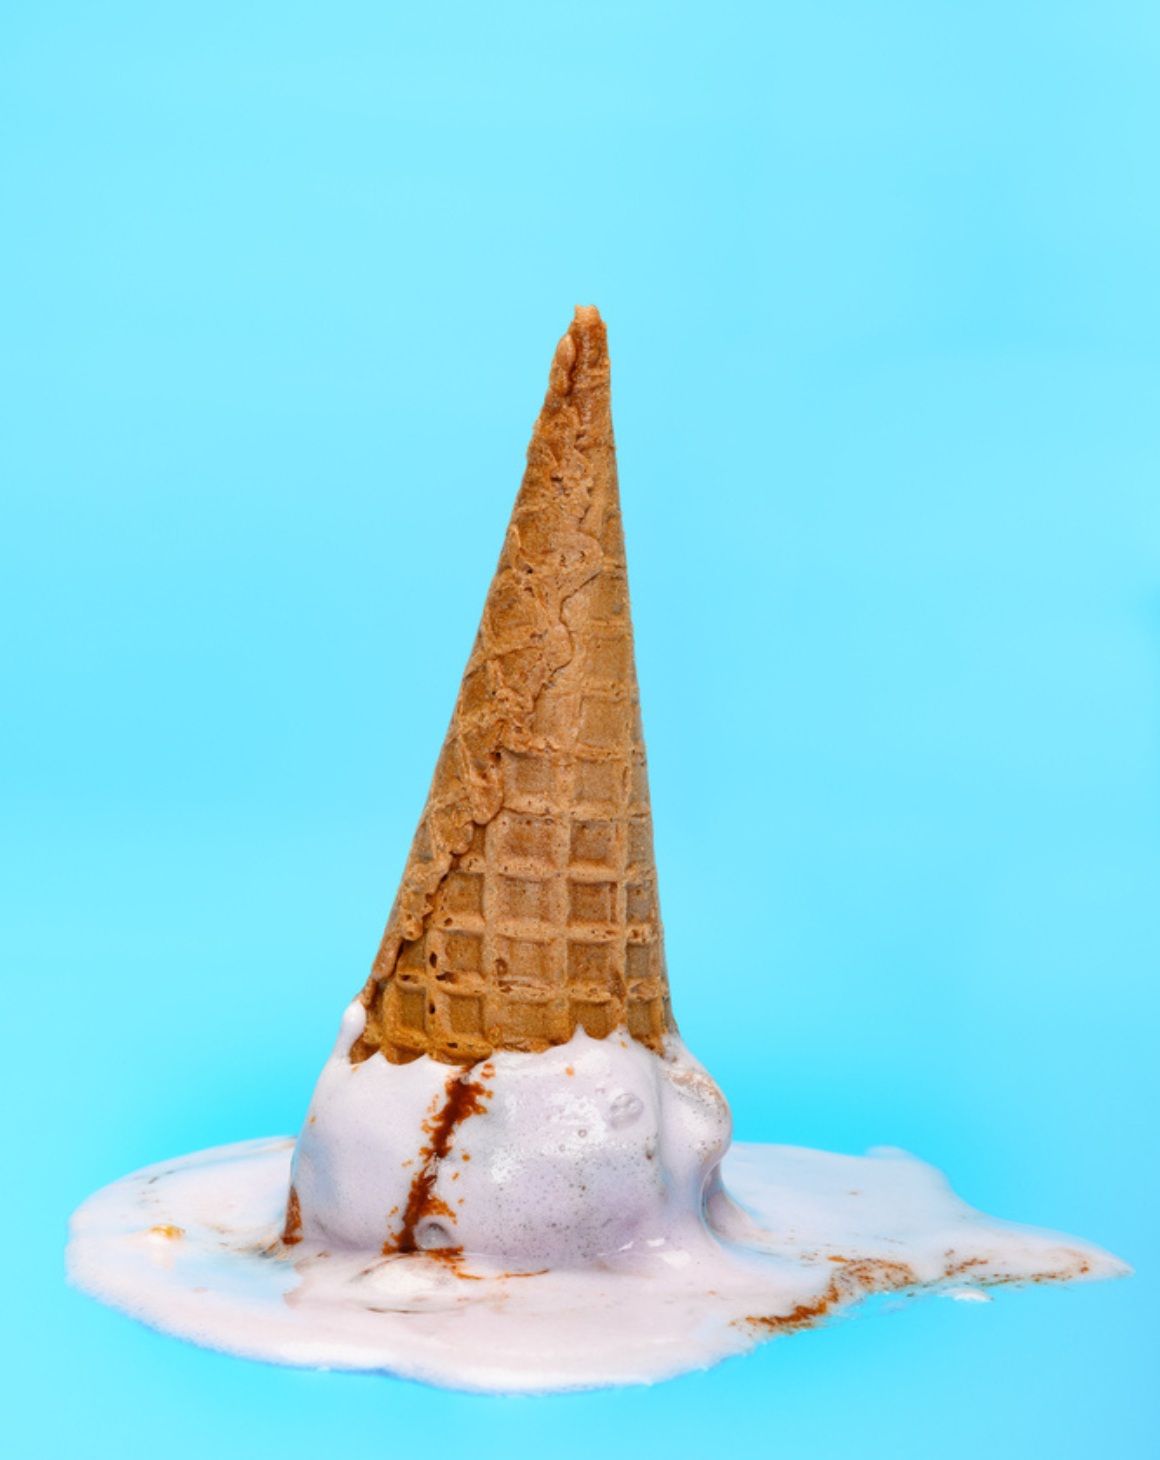 melted ice cream cone upside down against blue background